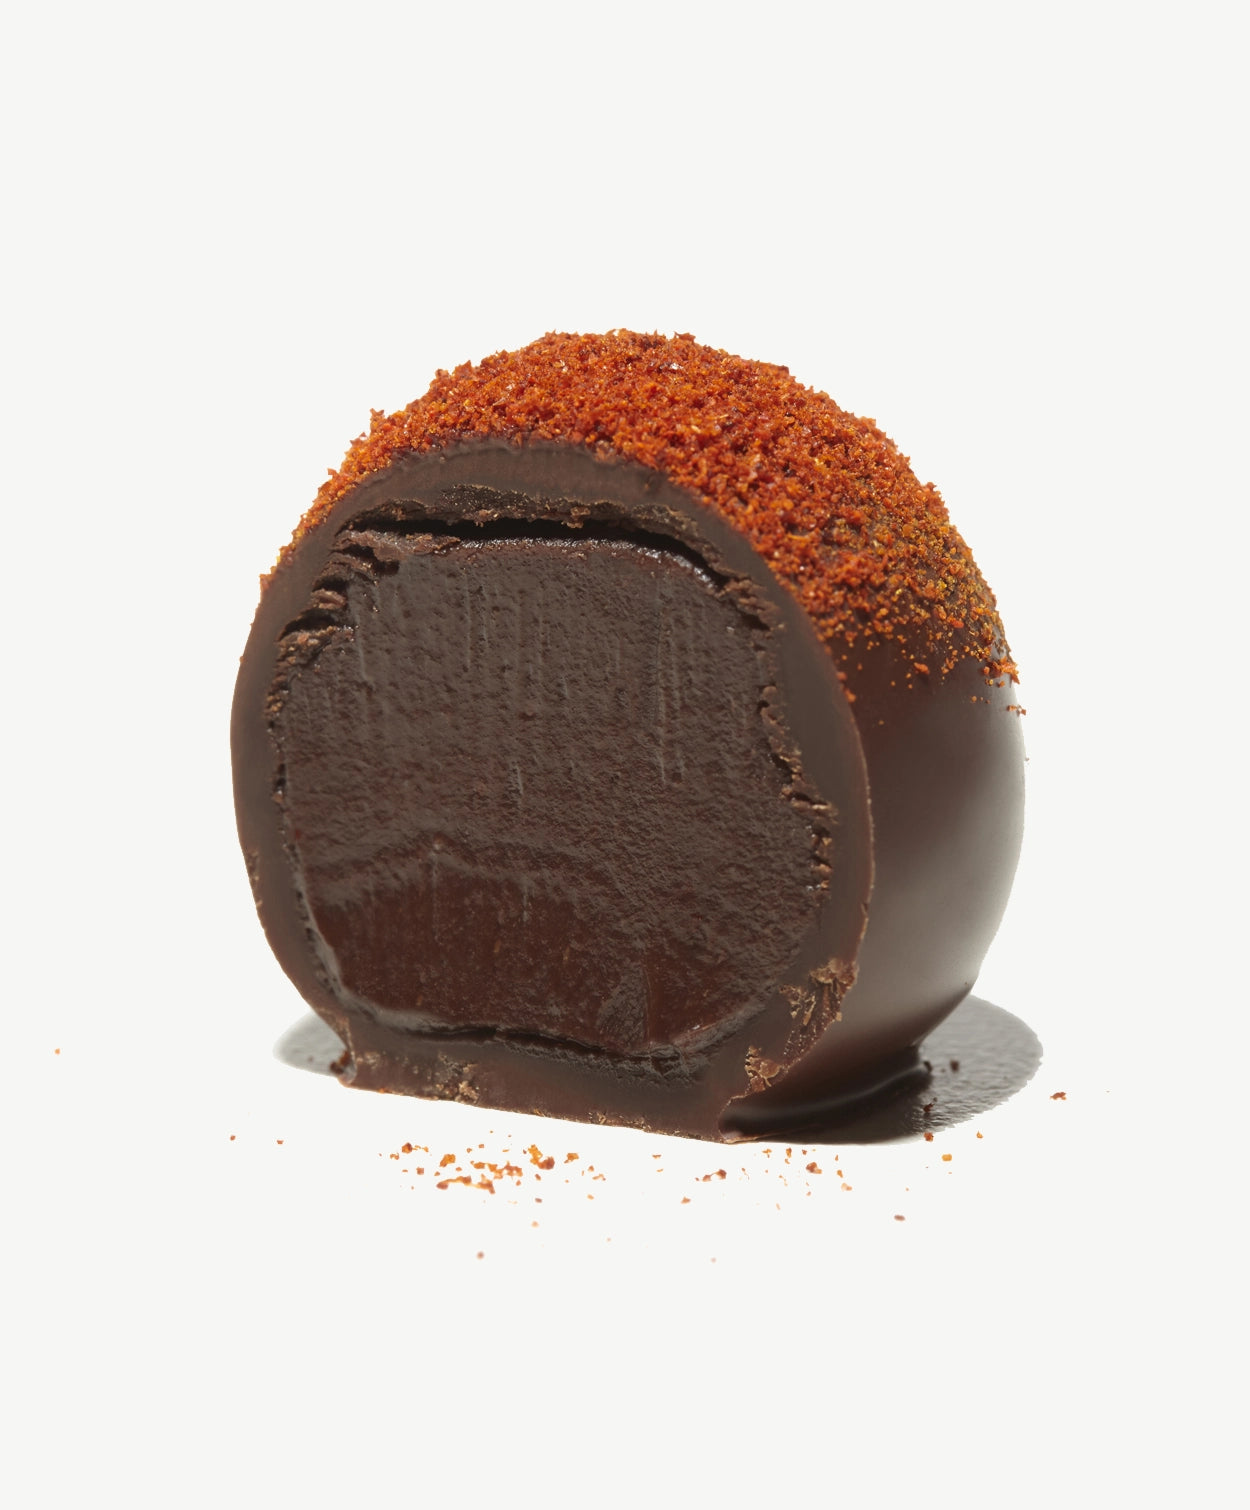 Vosges Haut-Chocolat Exotic Budapest Chocolate Truffle cut in half sprinkled with Kalocsan Paprika on a light grey background.